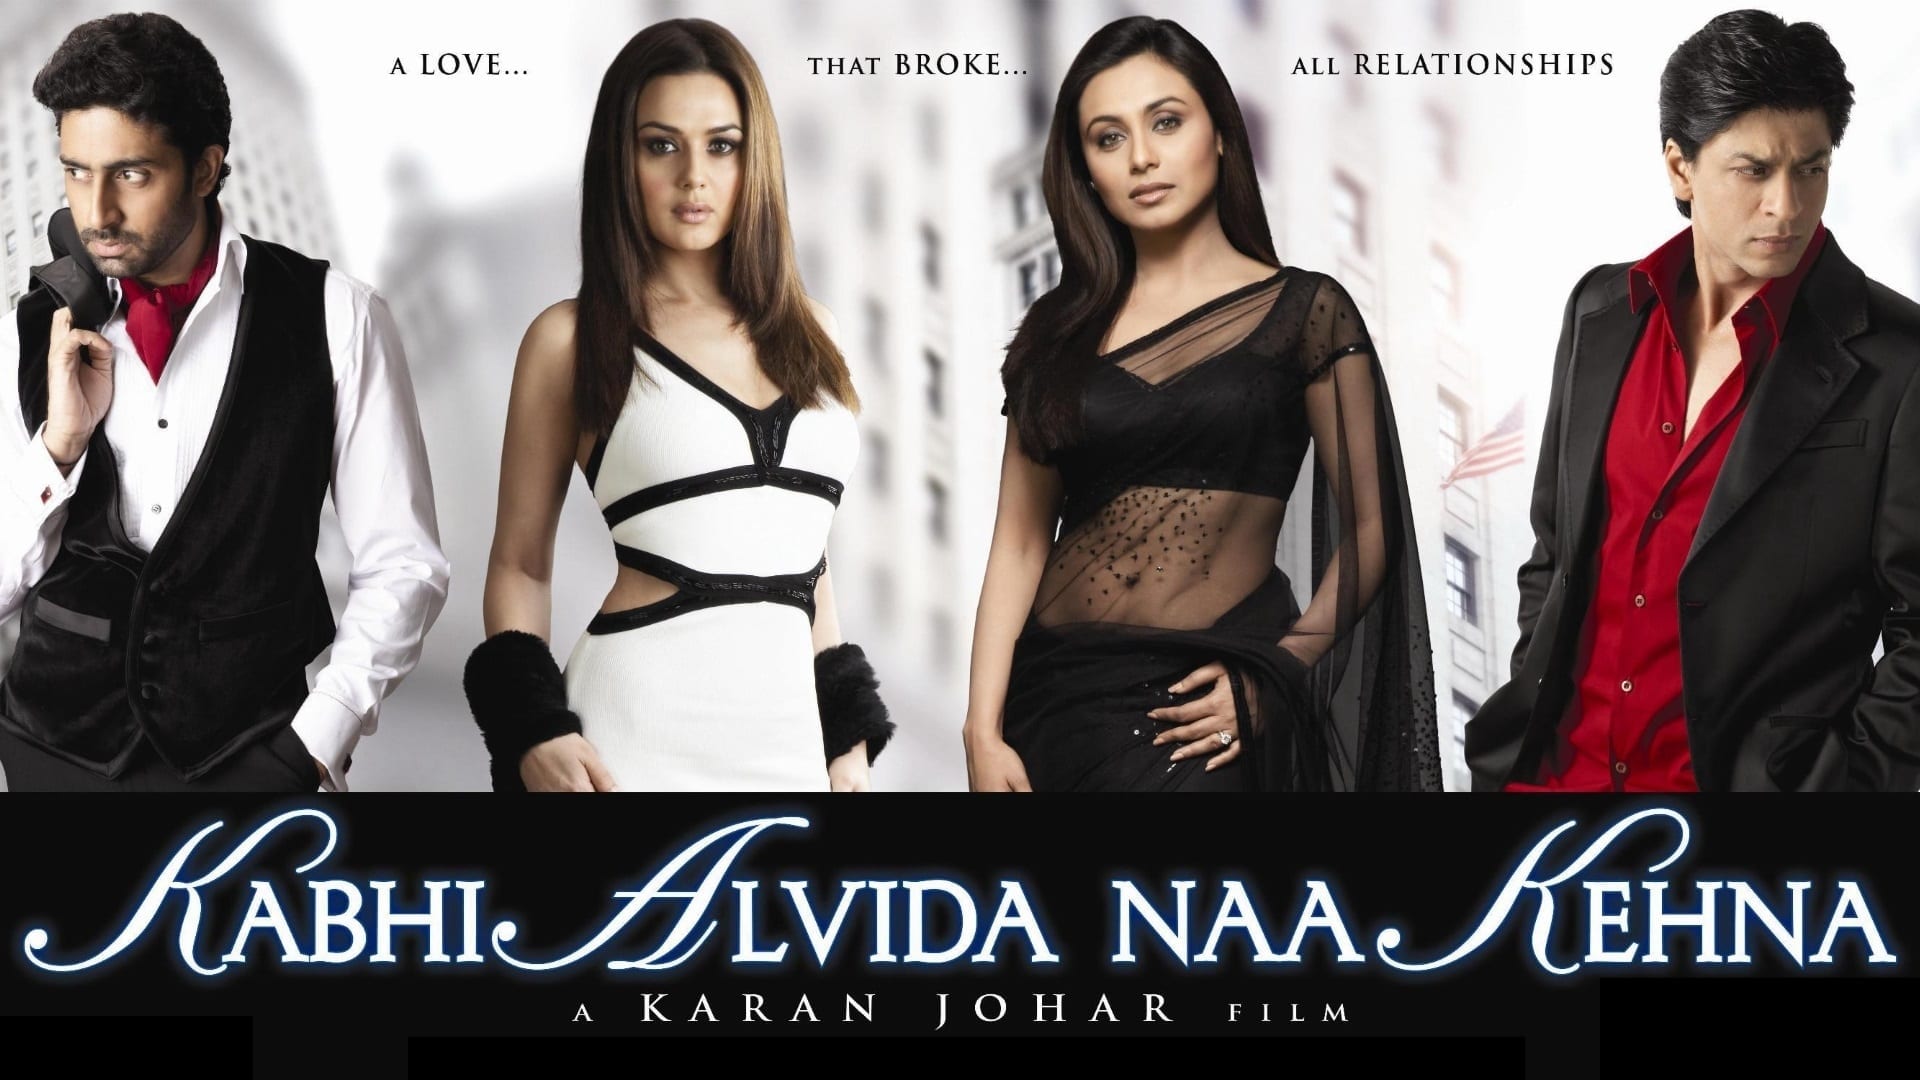 how-to-watch-kabhi-alvida-naa-kehna-full-movie-online-for-free-in-hd